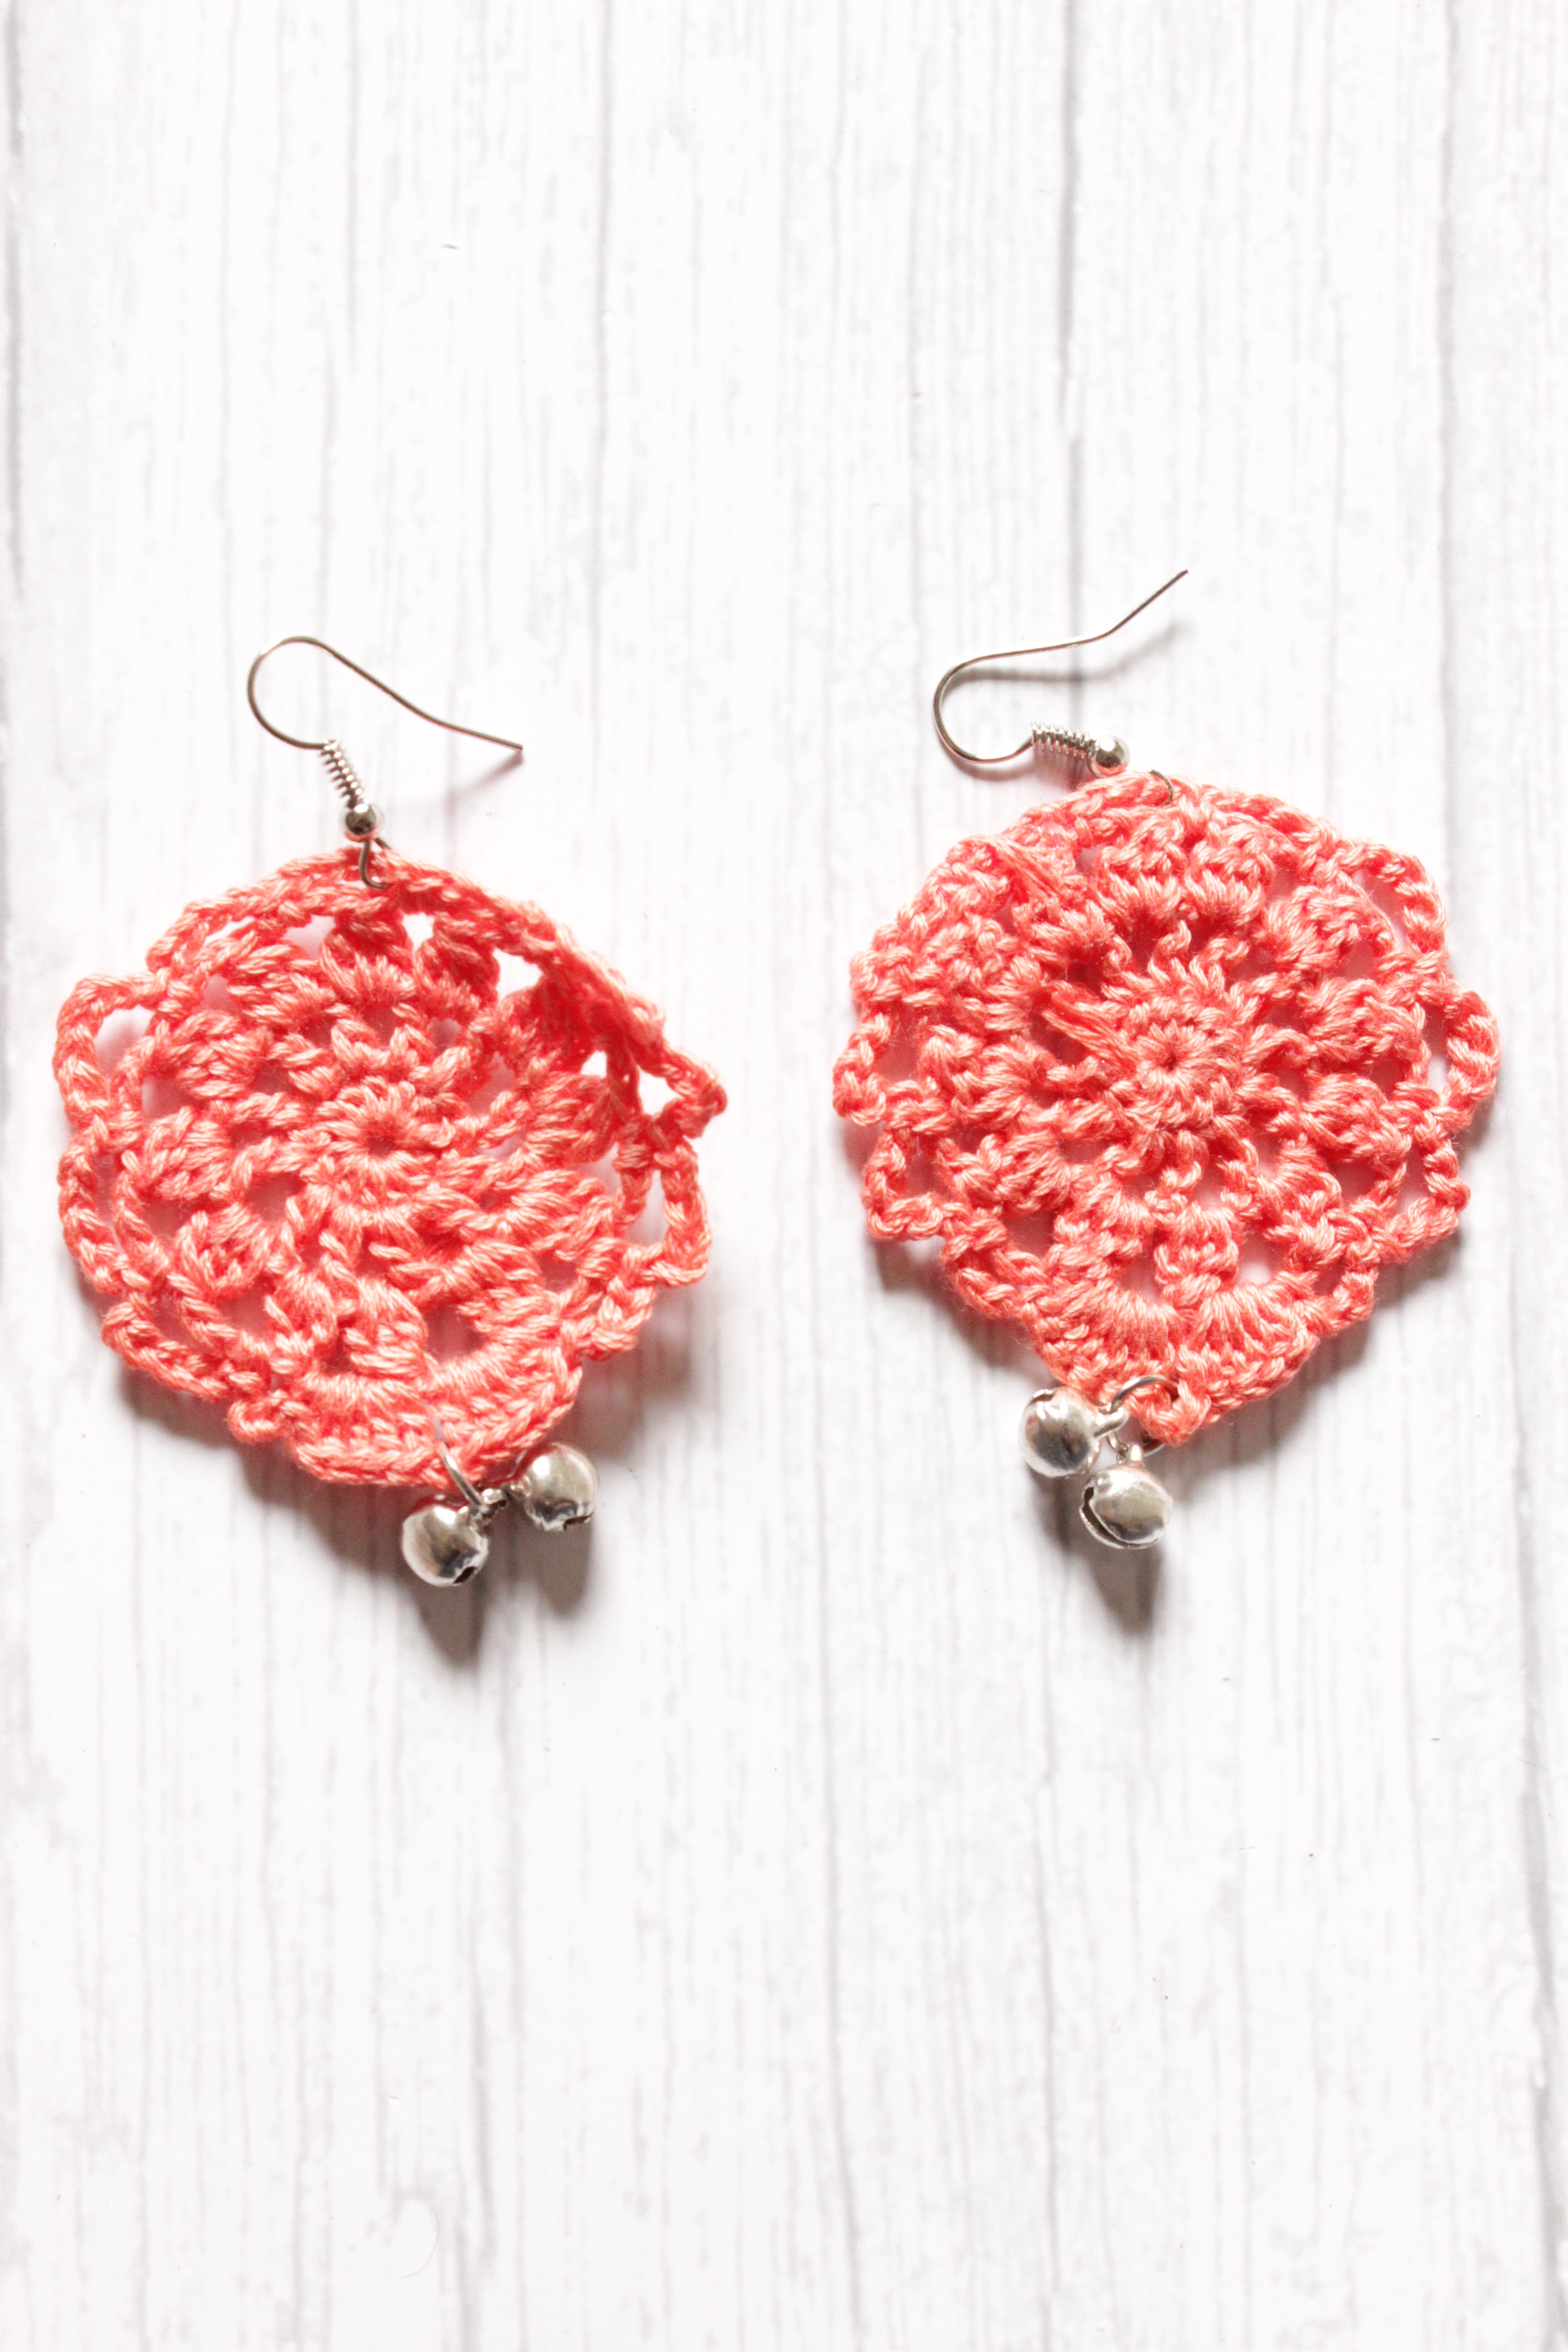 Peach Jaali Pattern Handcrafted Crochet Earrings Embellished with Ghungroo Beads